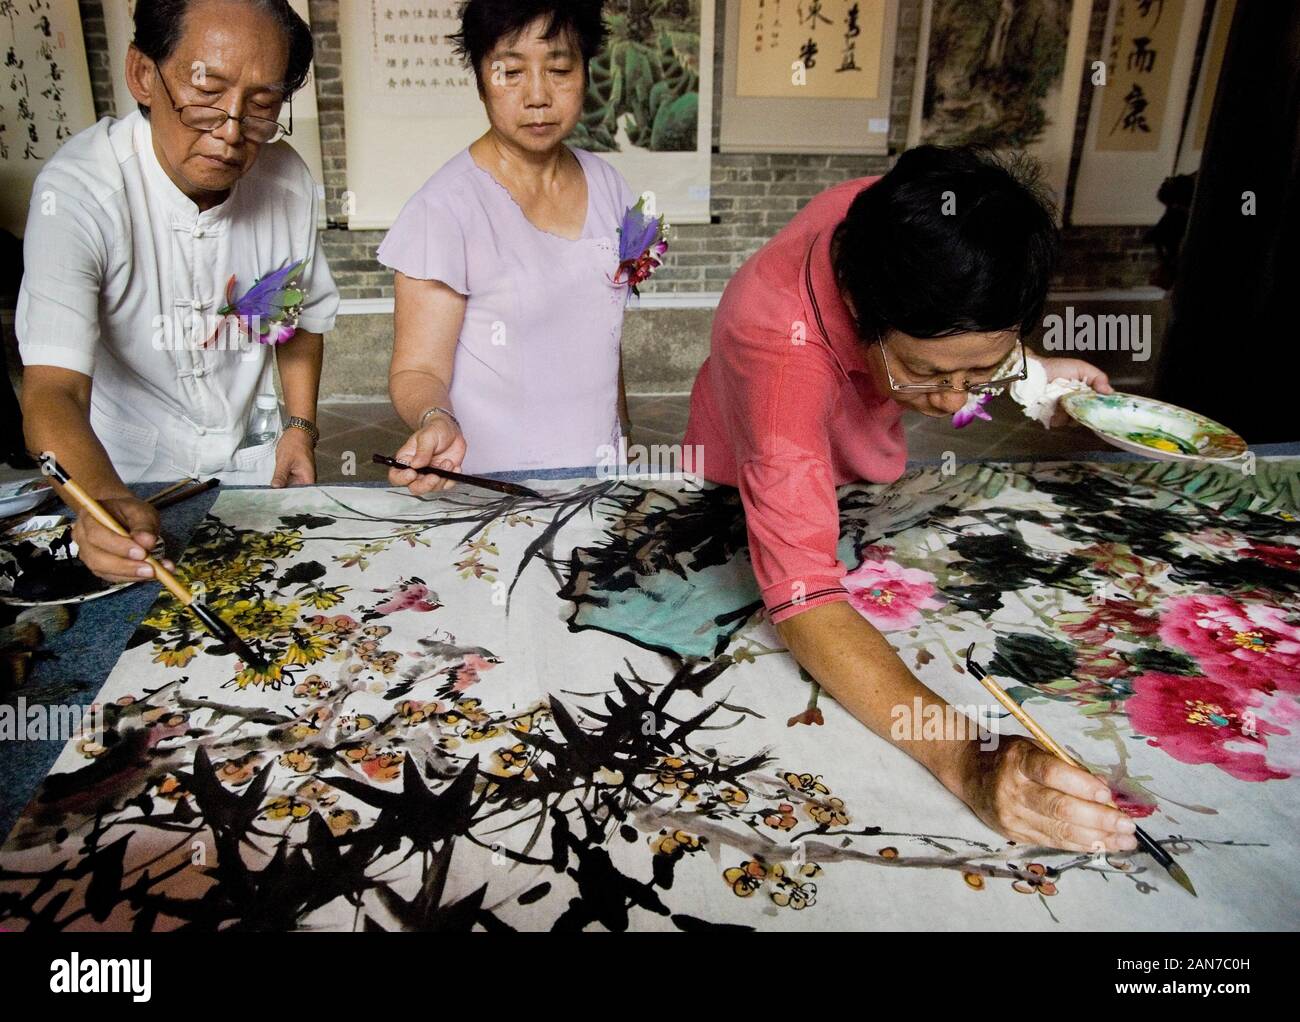 Chinese artists painting flowers Stock Photo